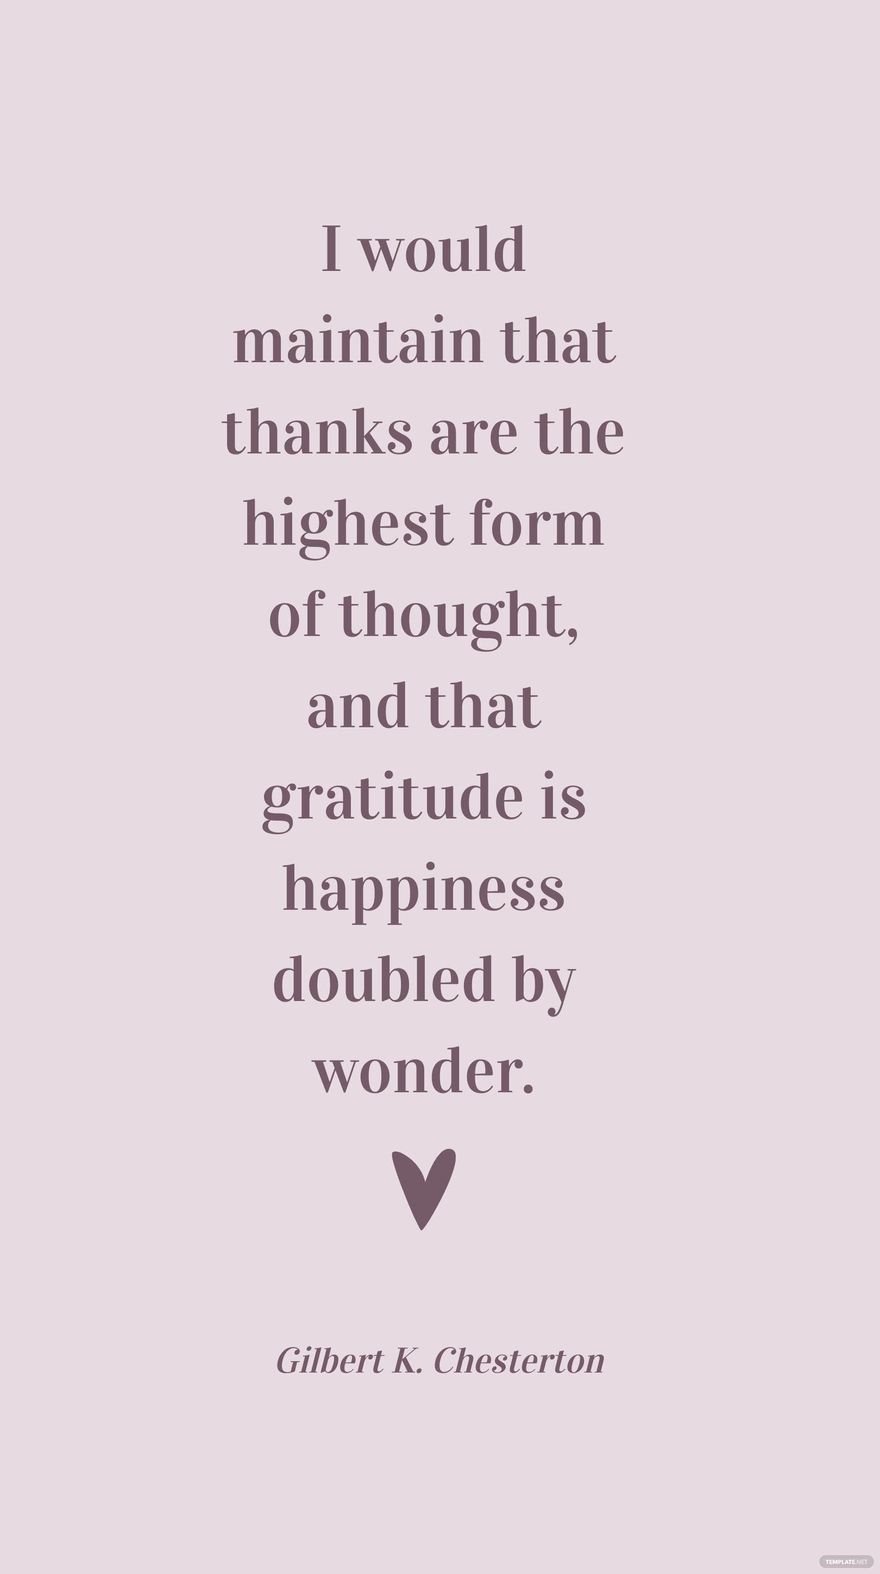 Gilbert K. Chesterton - I would maintain that thanks are the highest form of thought, and that gratitude is happiness doubled by wonder.